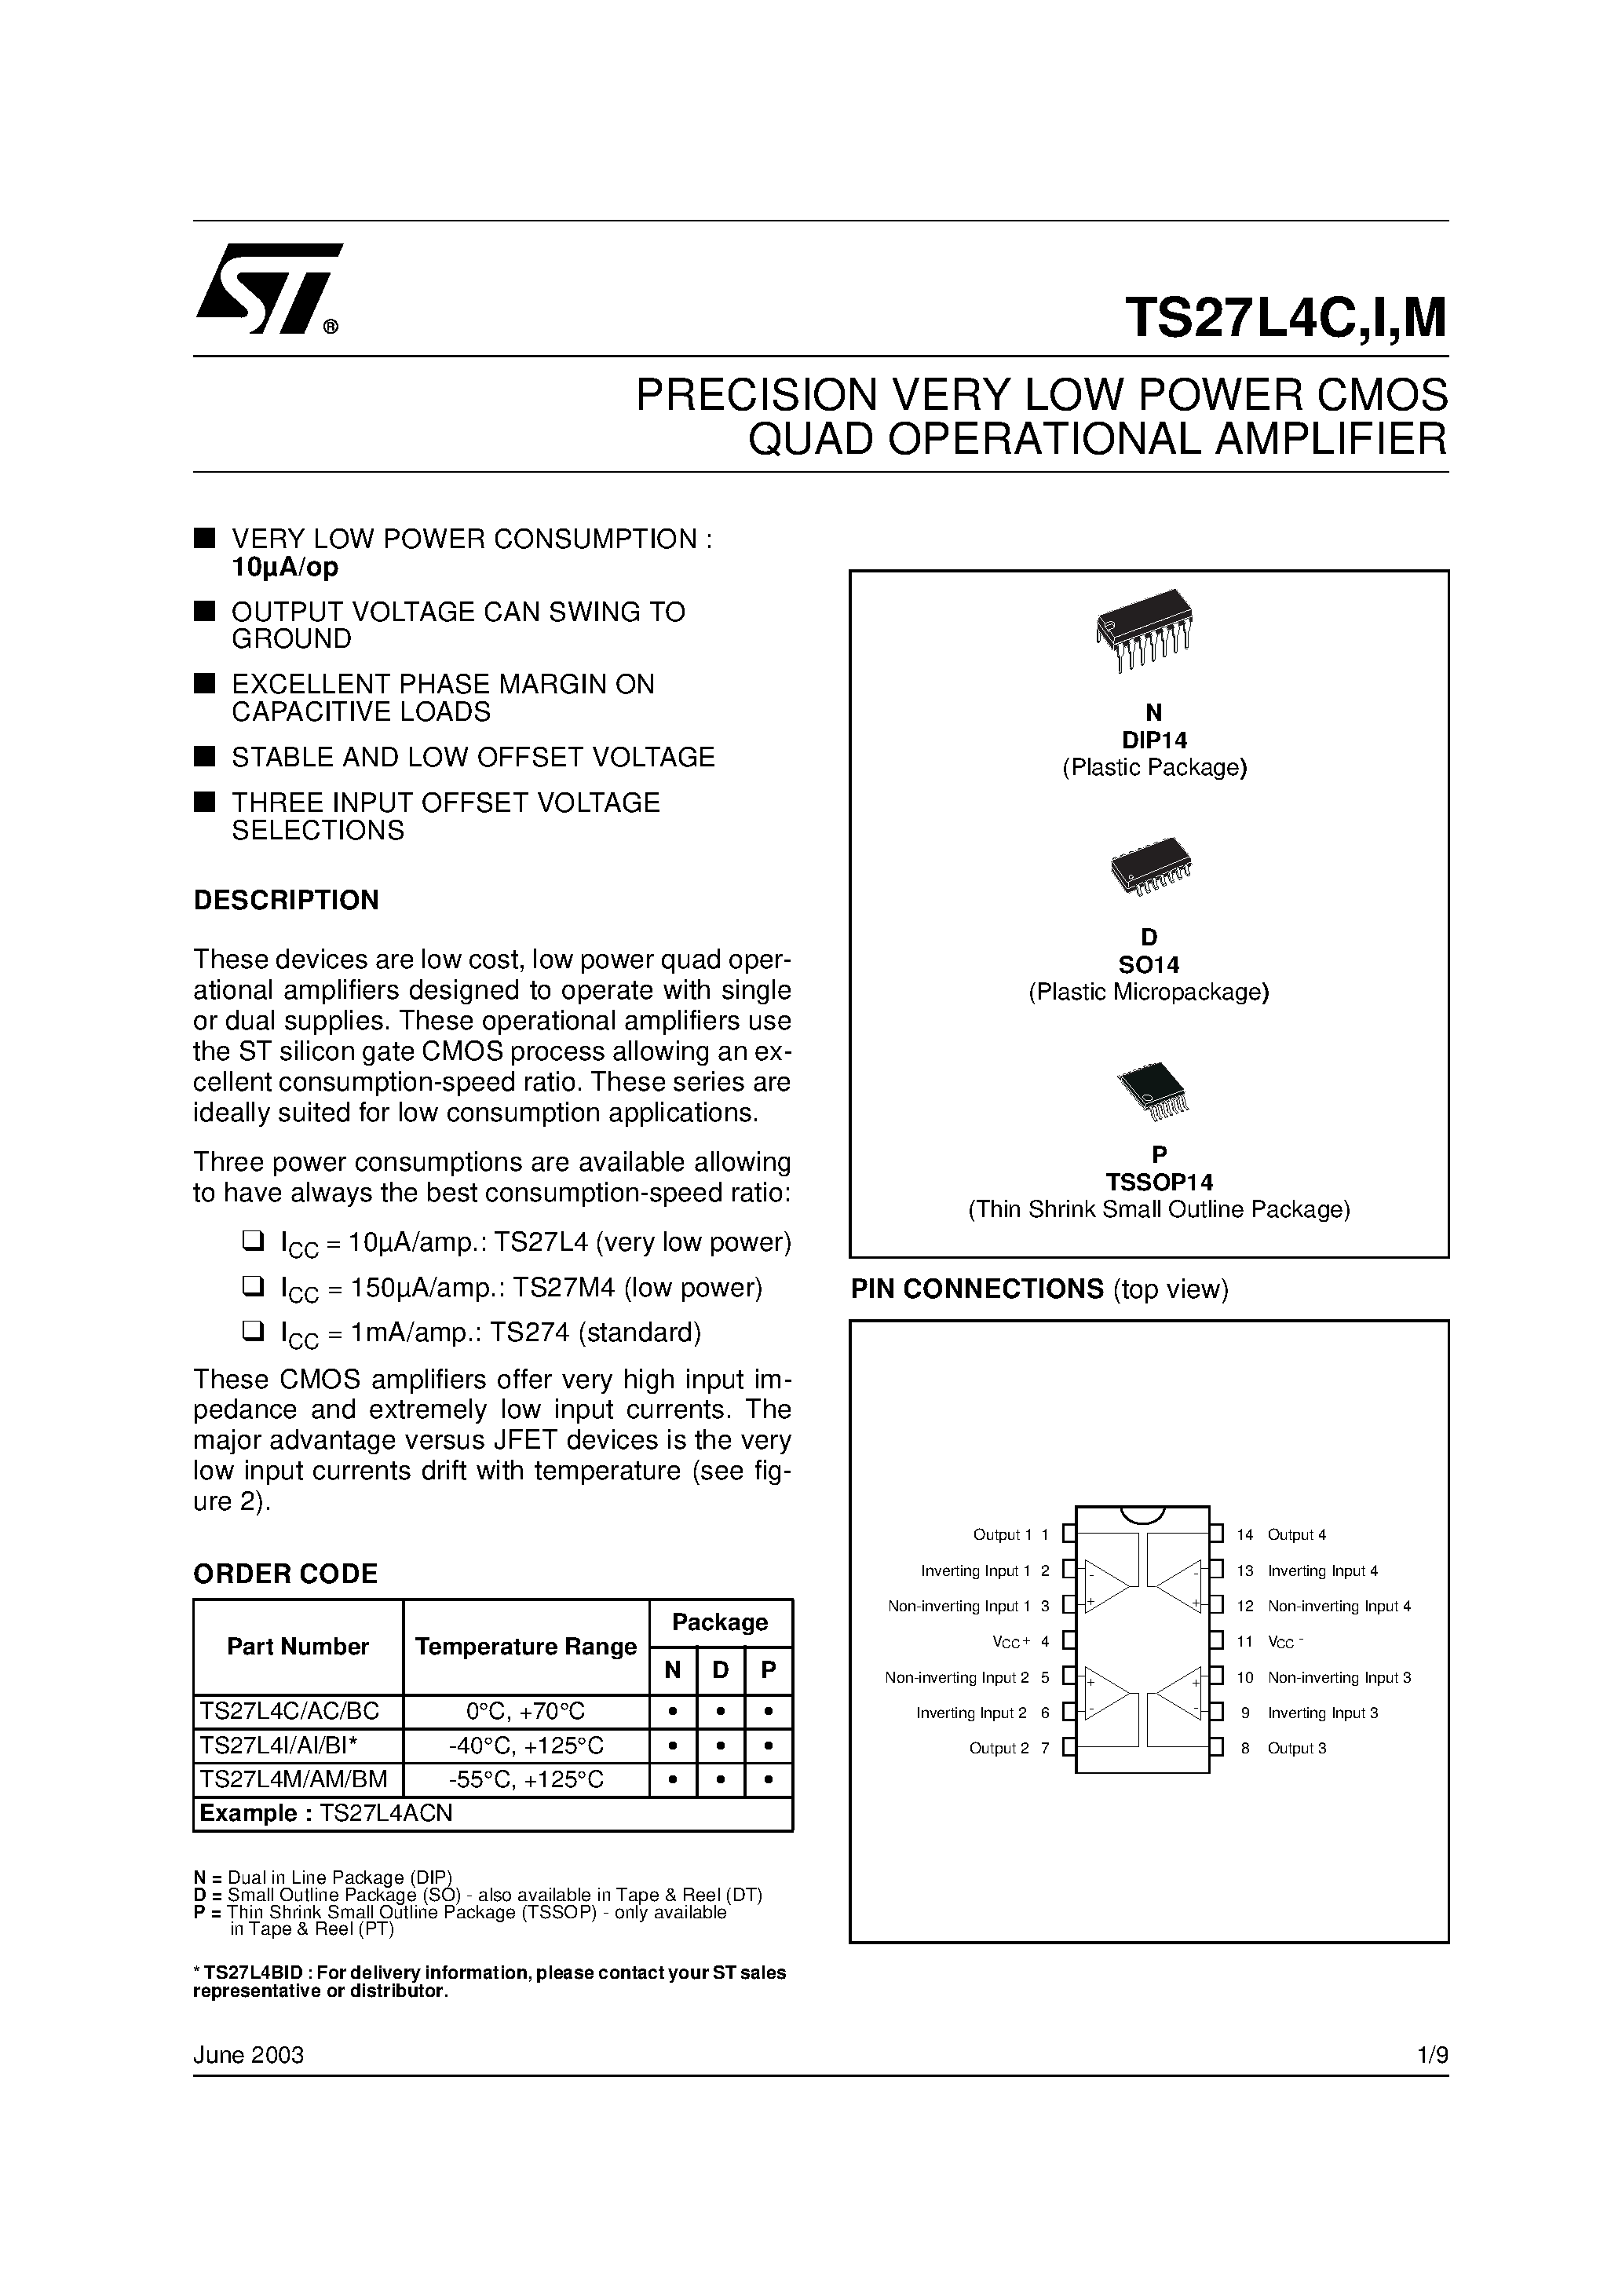 Datasheet TS27L4I - PRECISION VERY LOW POWER CMOS QUAD OPERATIONAL AMPLIFIER page 1